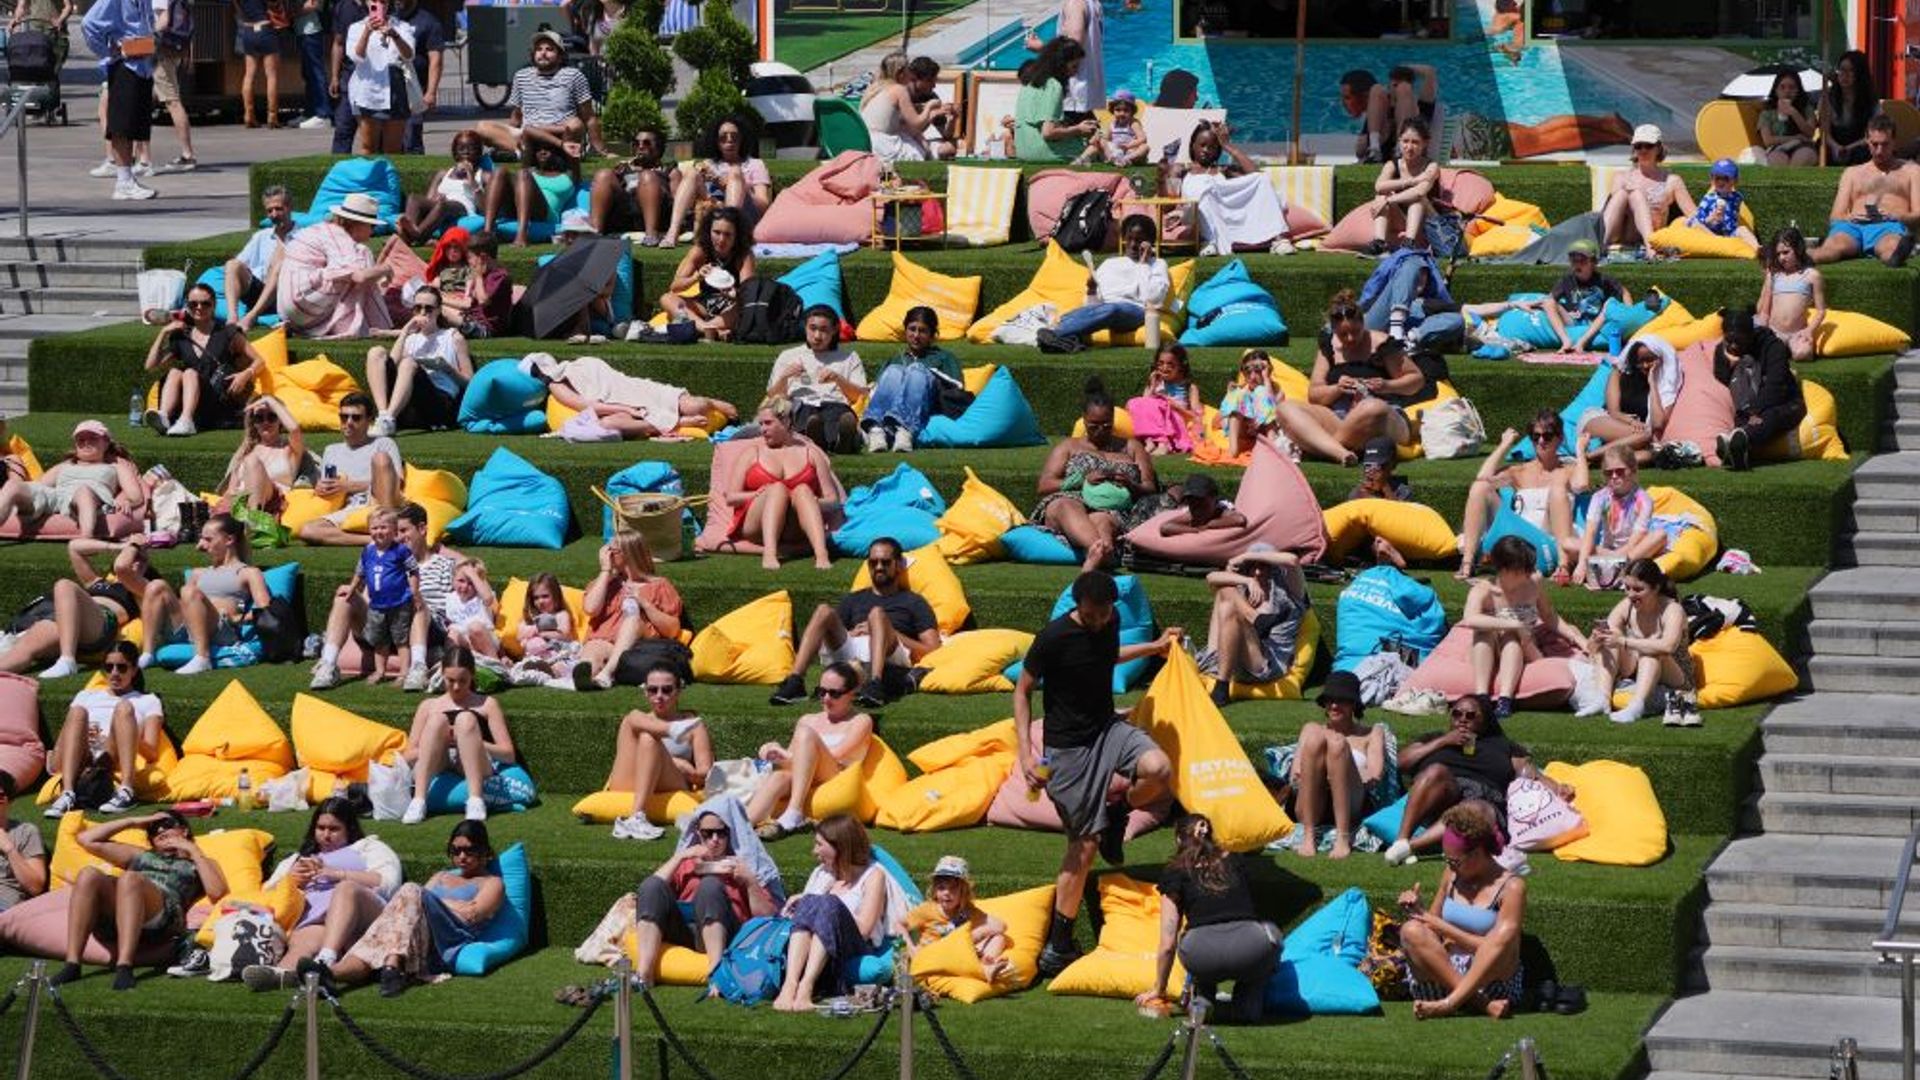 Hottest day of year in UK recorded as temperatures top 31C